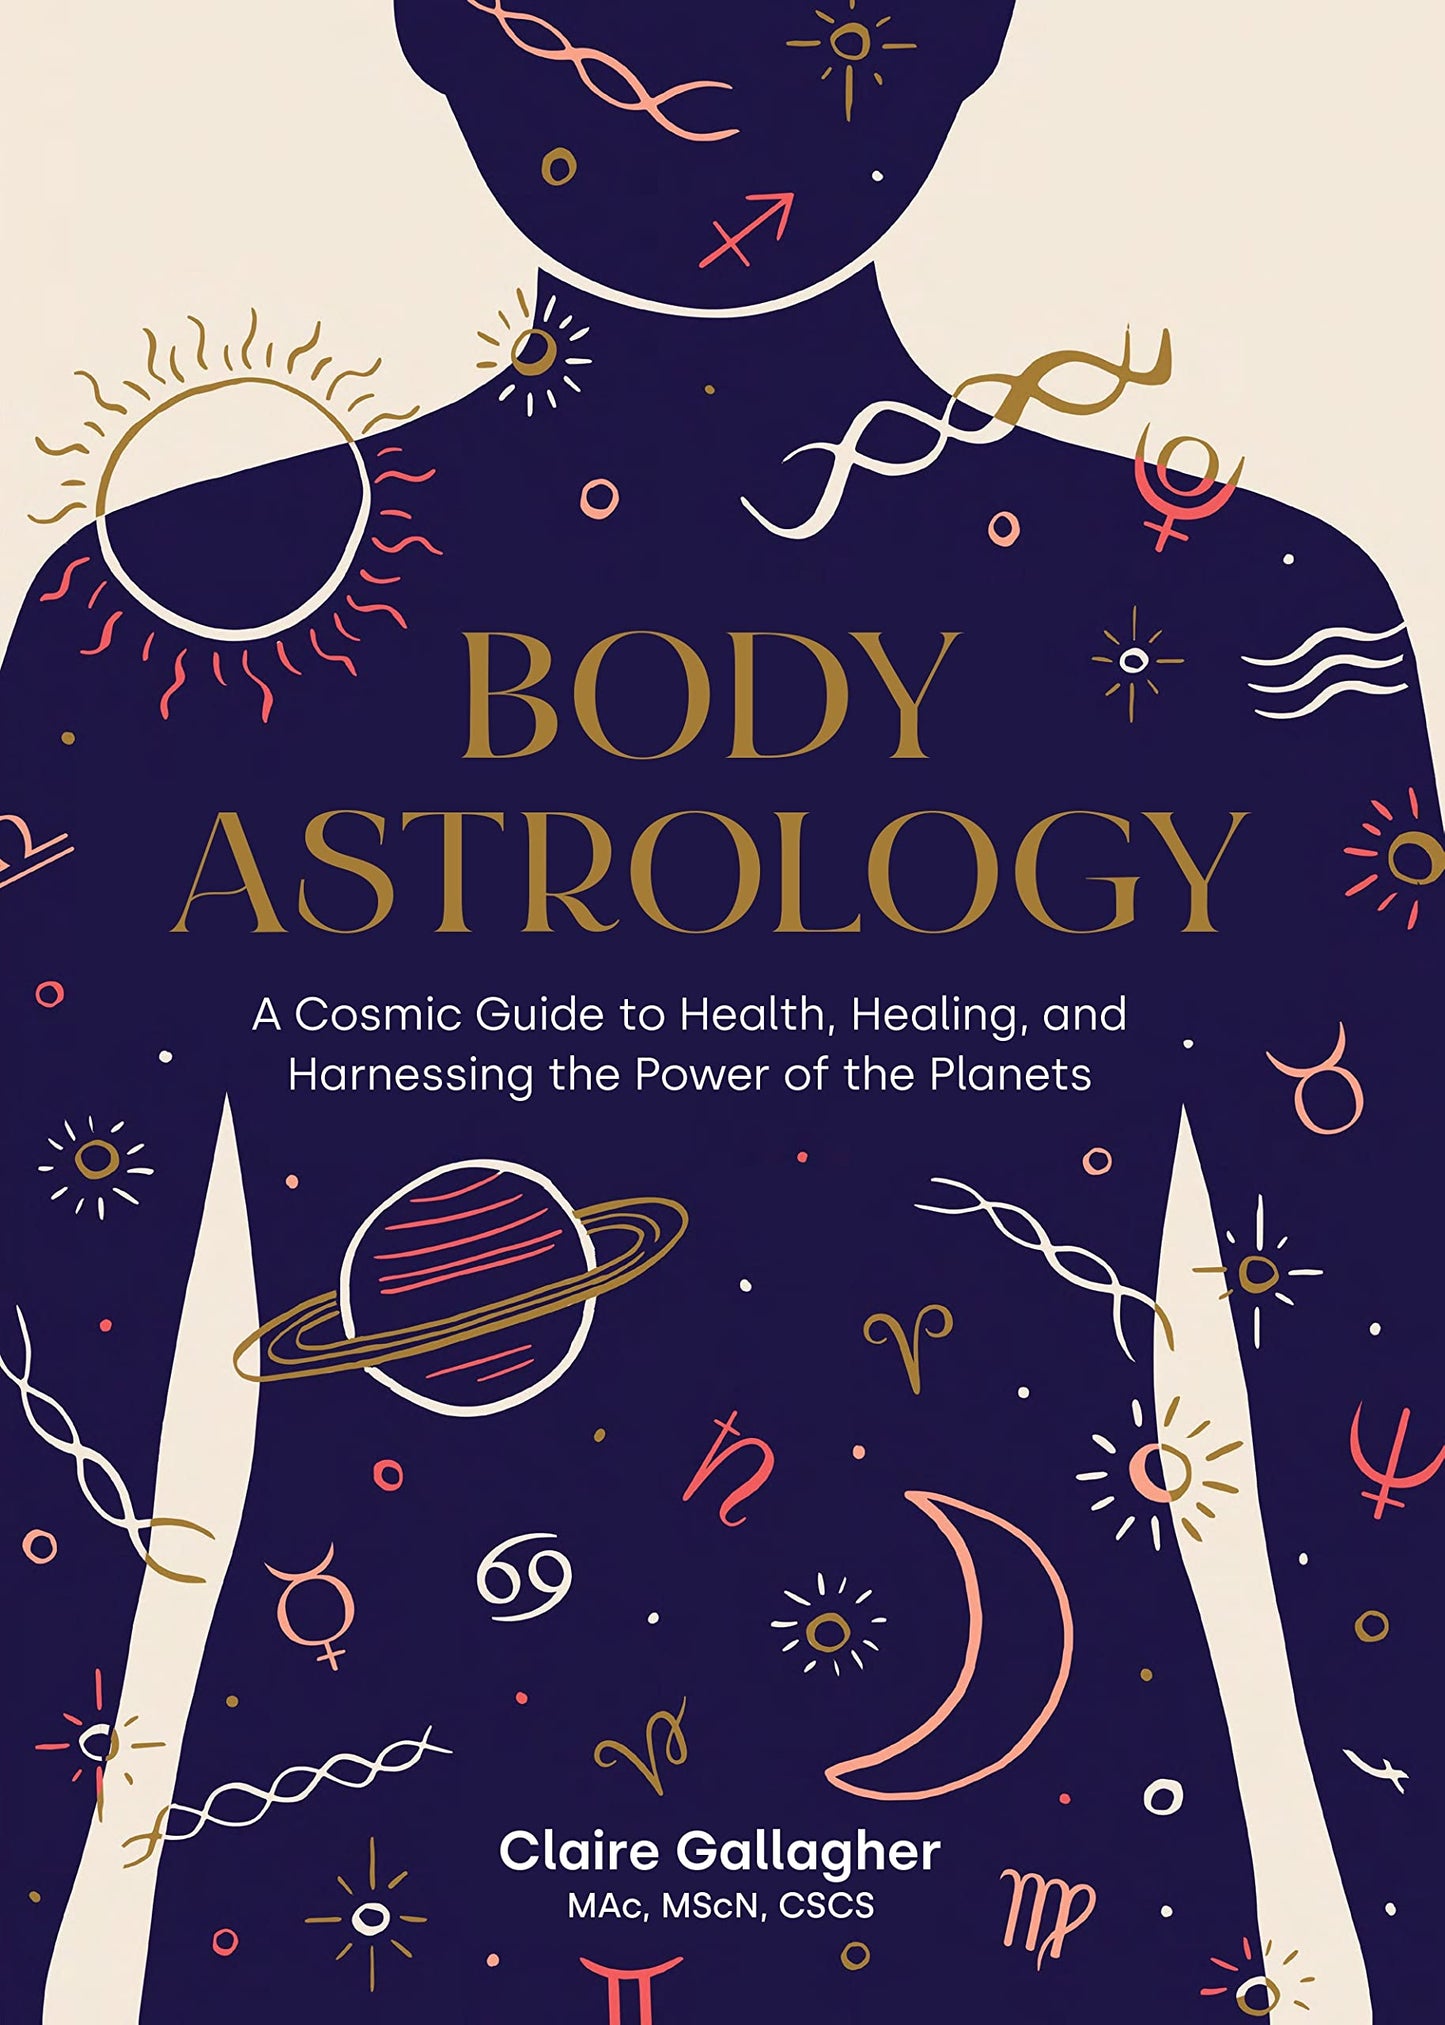 Load image into Gallery viewer, BODY ASTROLOGY - GALLAGHER, C. - PAPERBACK
